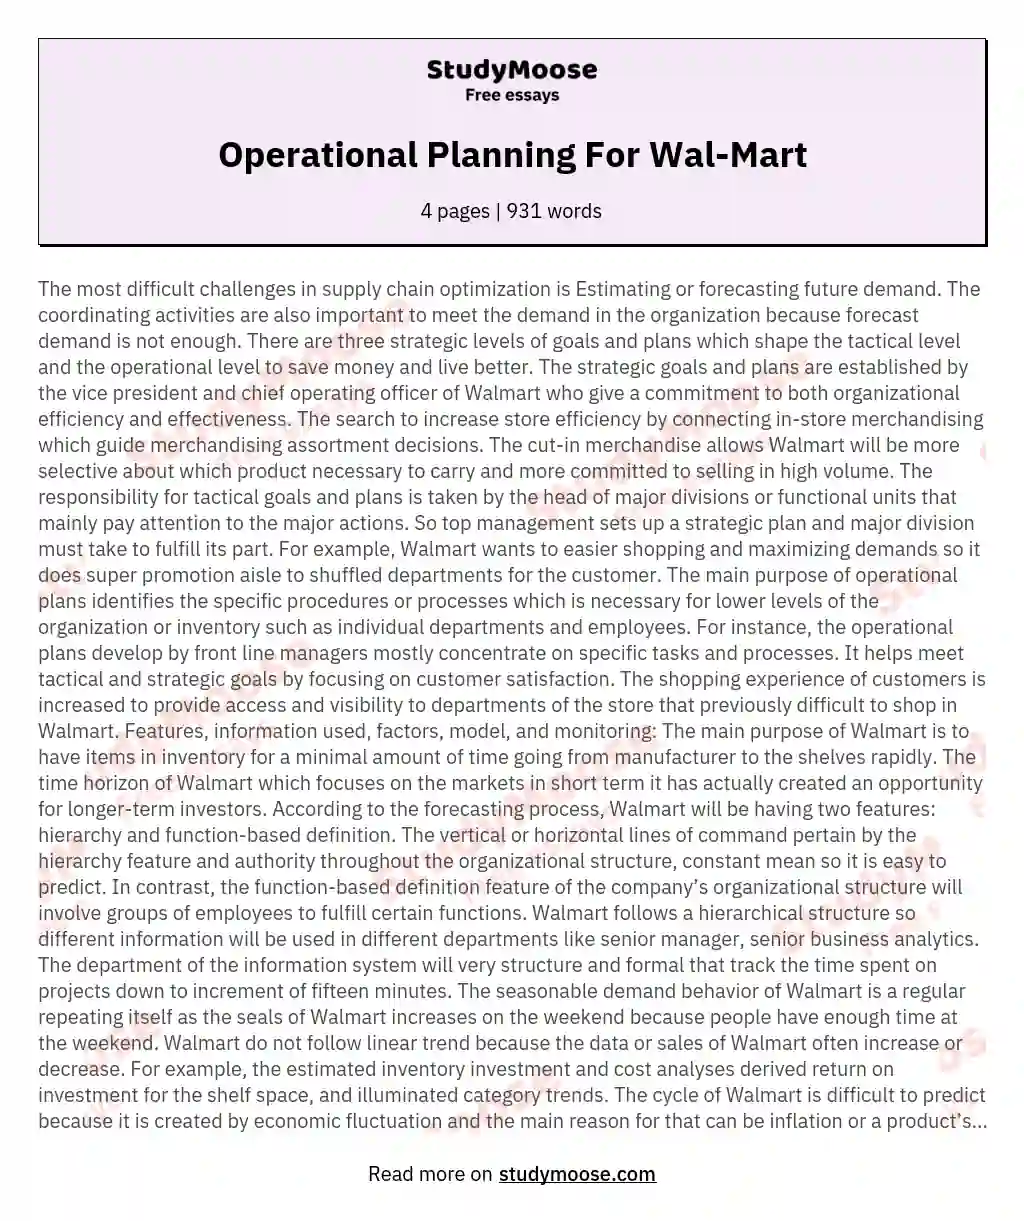 Operational Planning For Wal-Mart essay